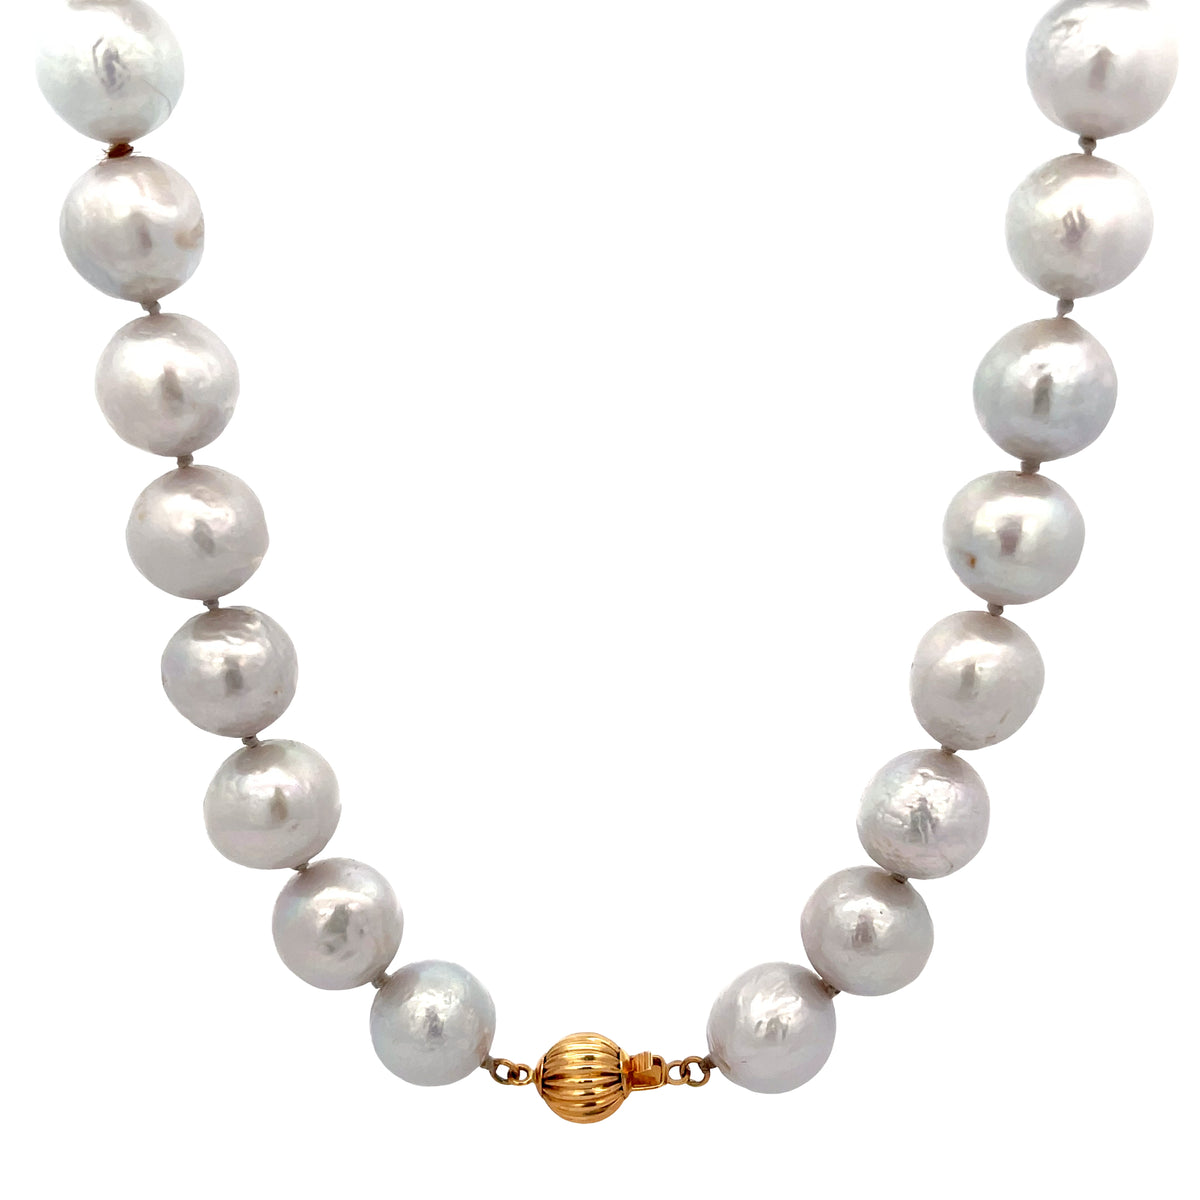 Ladies 14k yellow gold Grey Pearl necklace